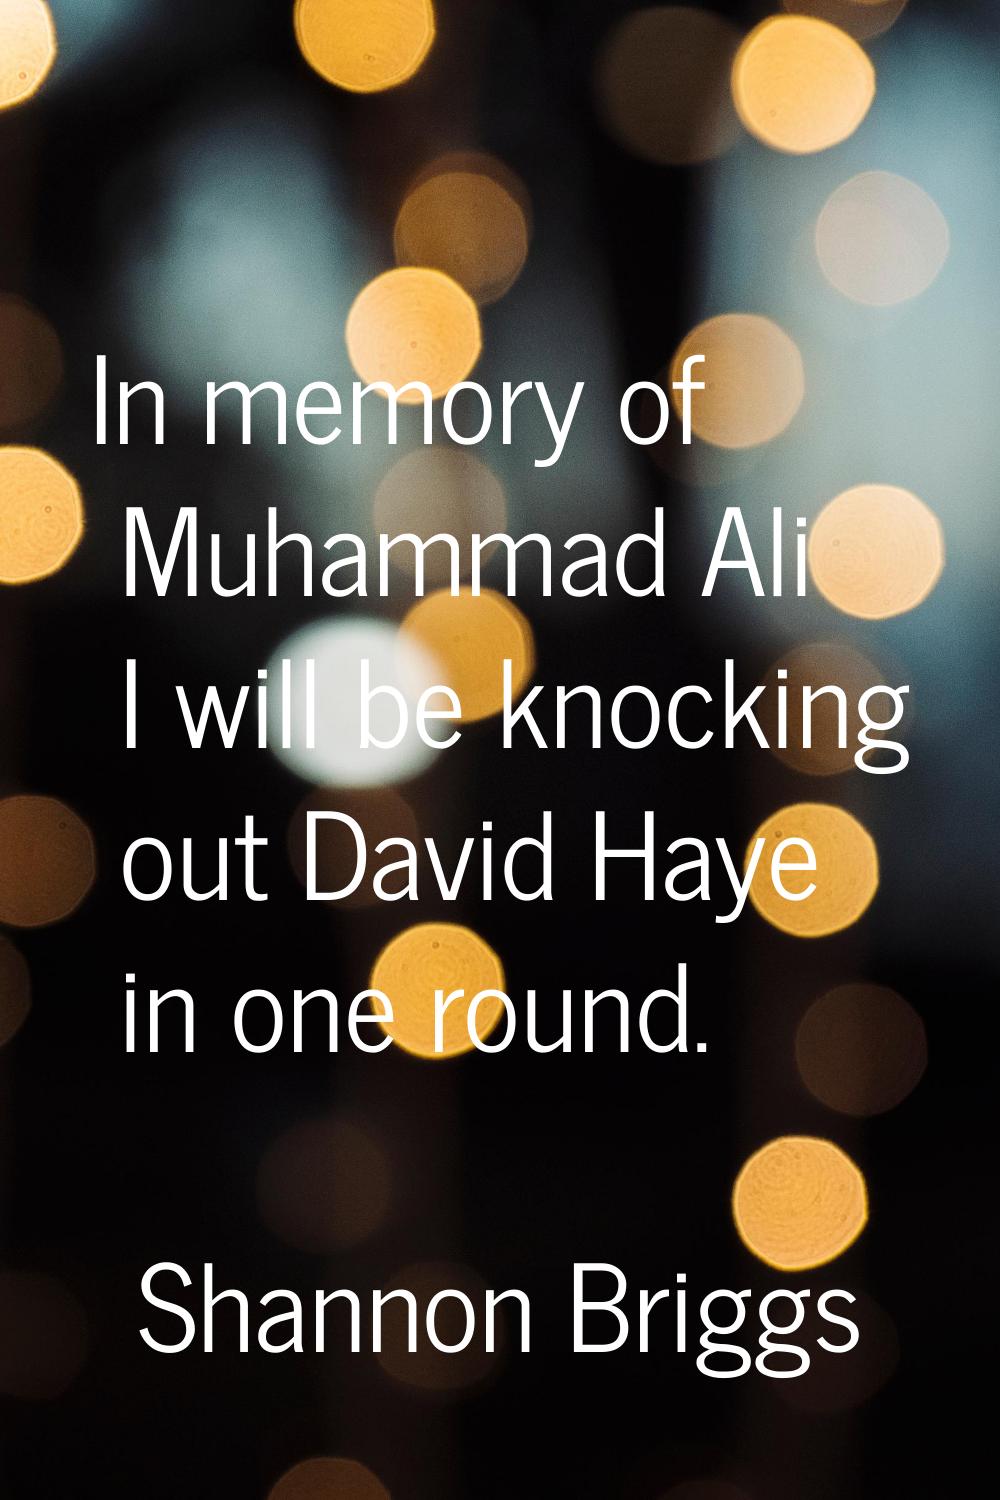 In memory of Muhammad Ali I will be knocking out David Haye in one round.